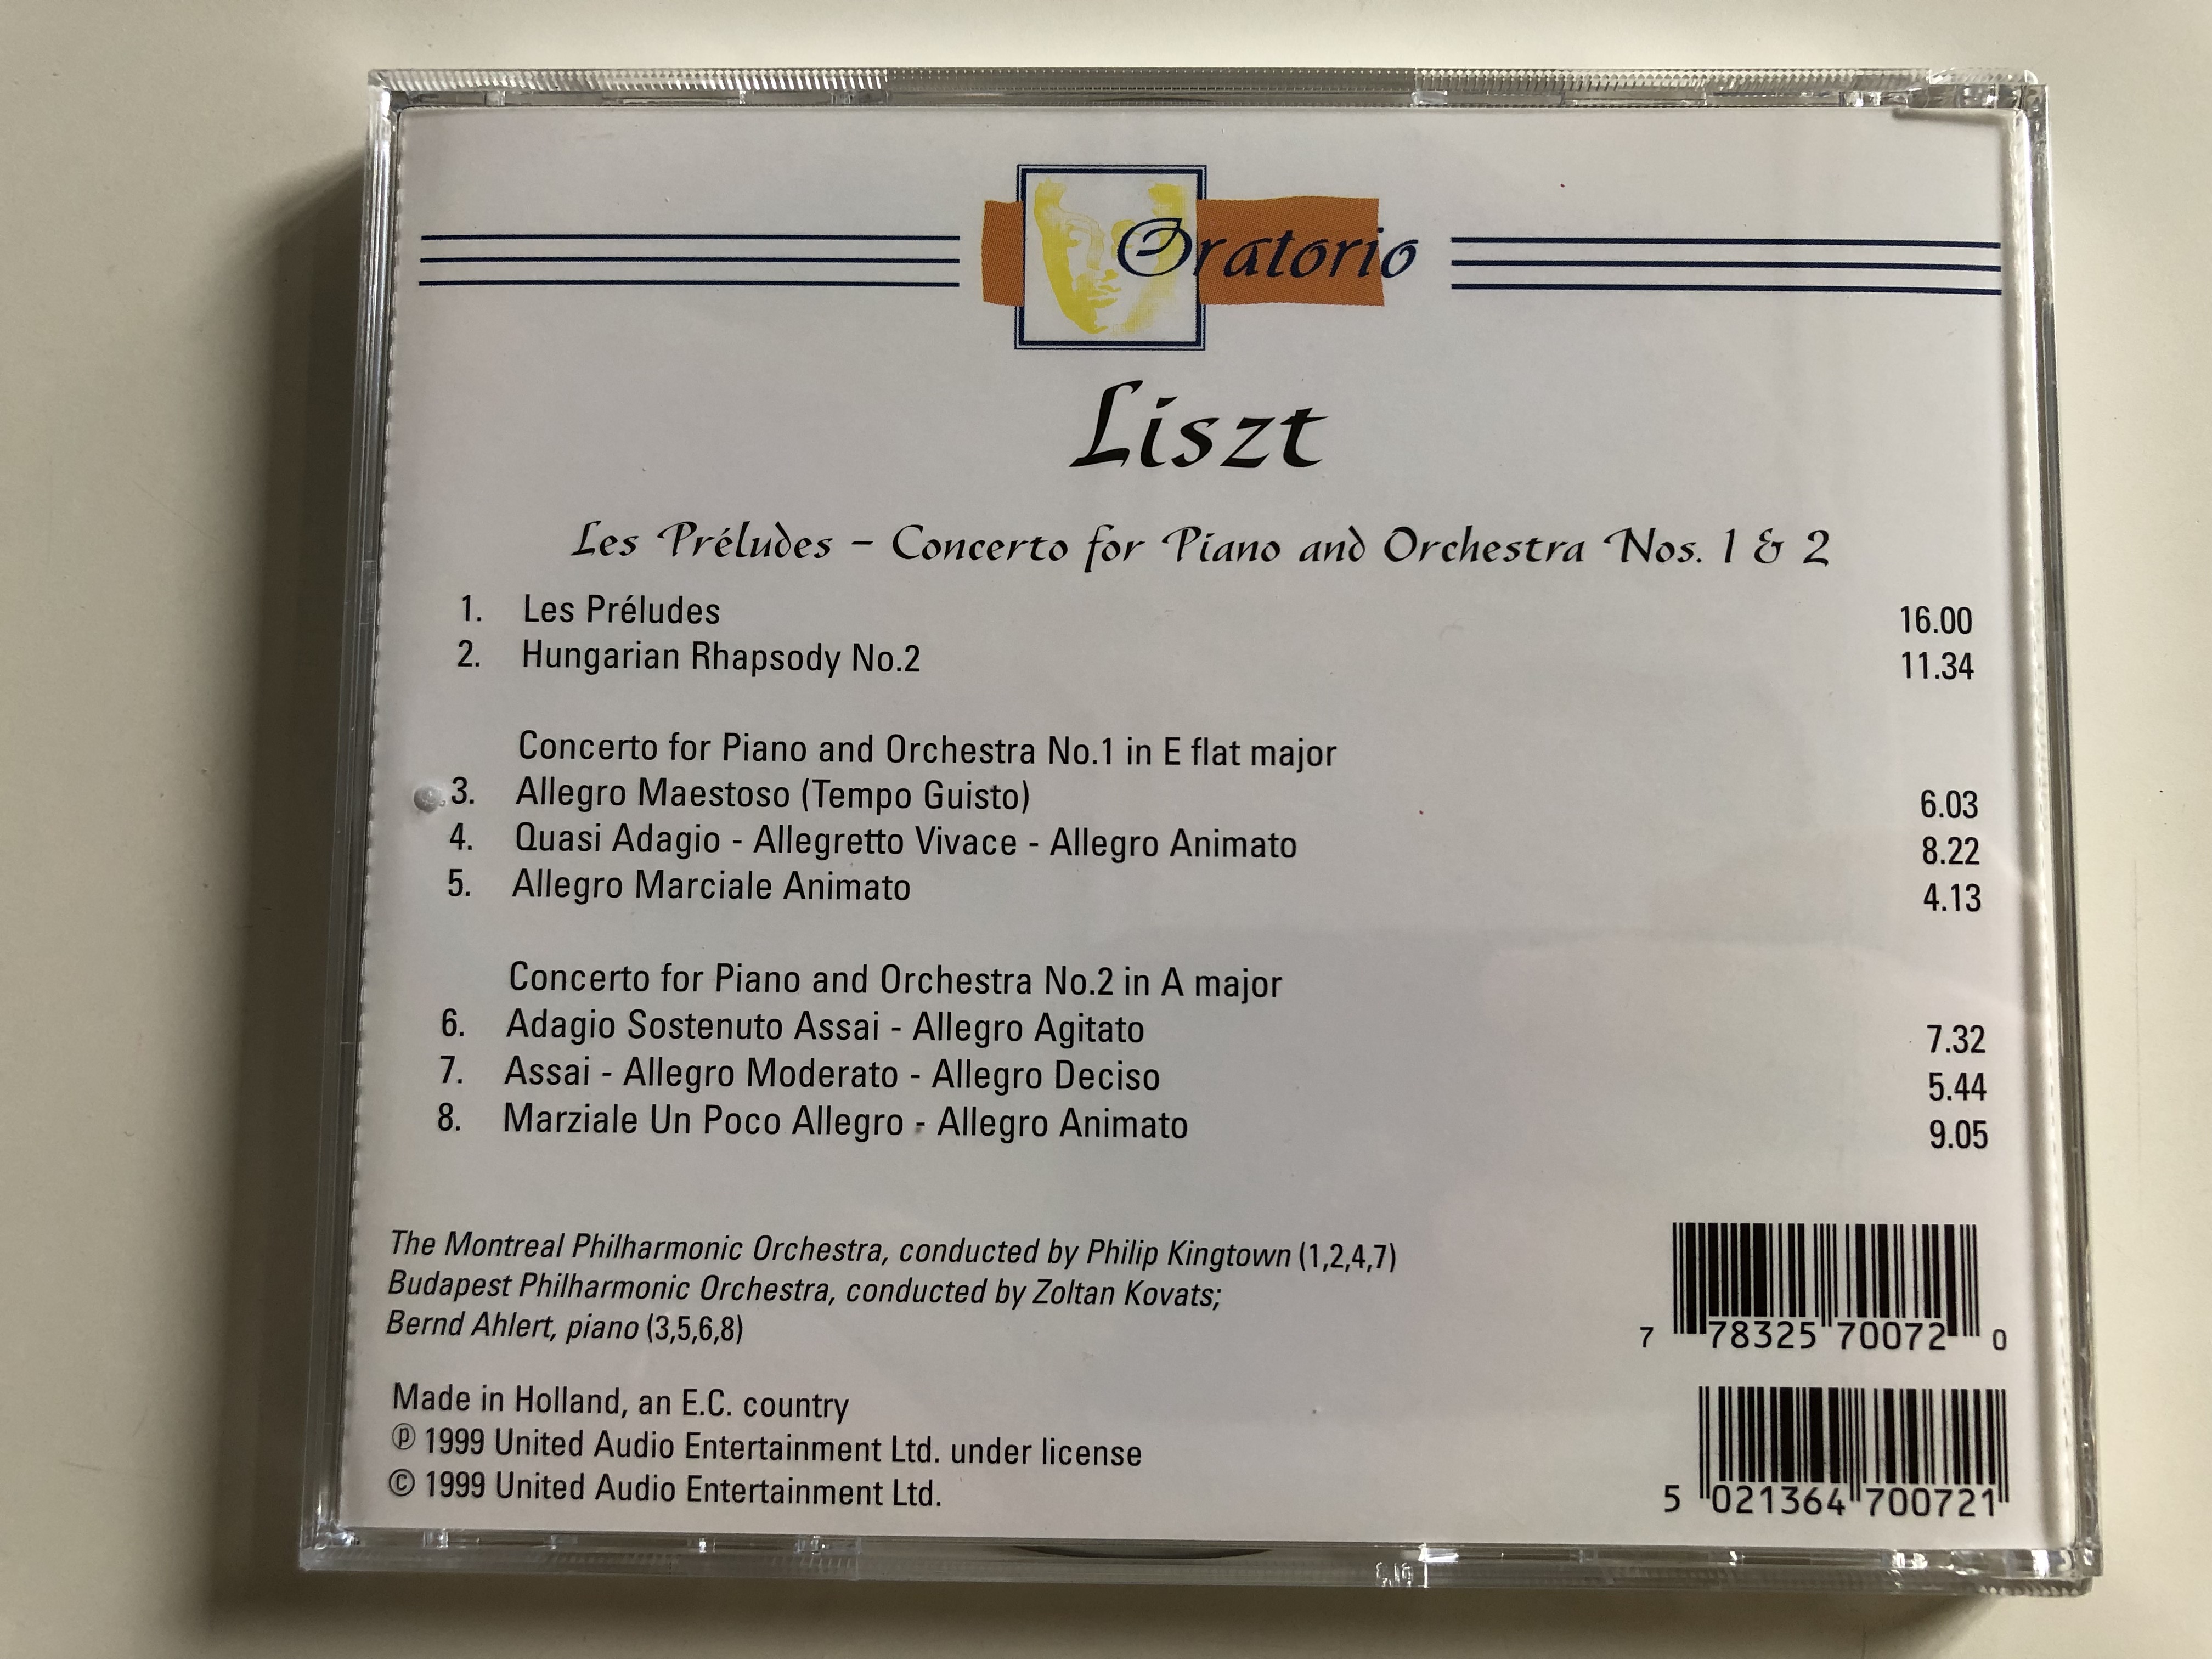 liszt-les-pr-ludes-concerto-for-piano-and-orchestra-nos.-1-2-the-montreal-philharmonic-orchestra-conducted-by-philip-kingtown-budapest-philharmonic-orchestra-conducted-by-zolt-n-kov-ts-audio-cd-1999-3-.jpg